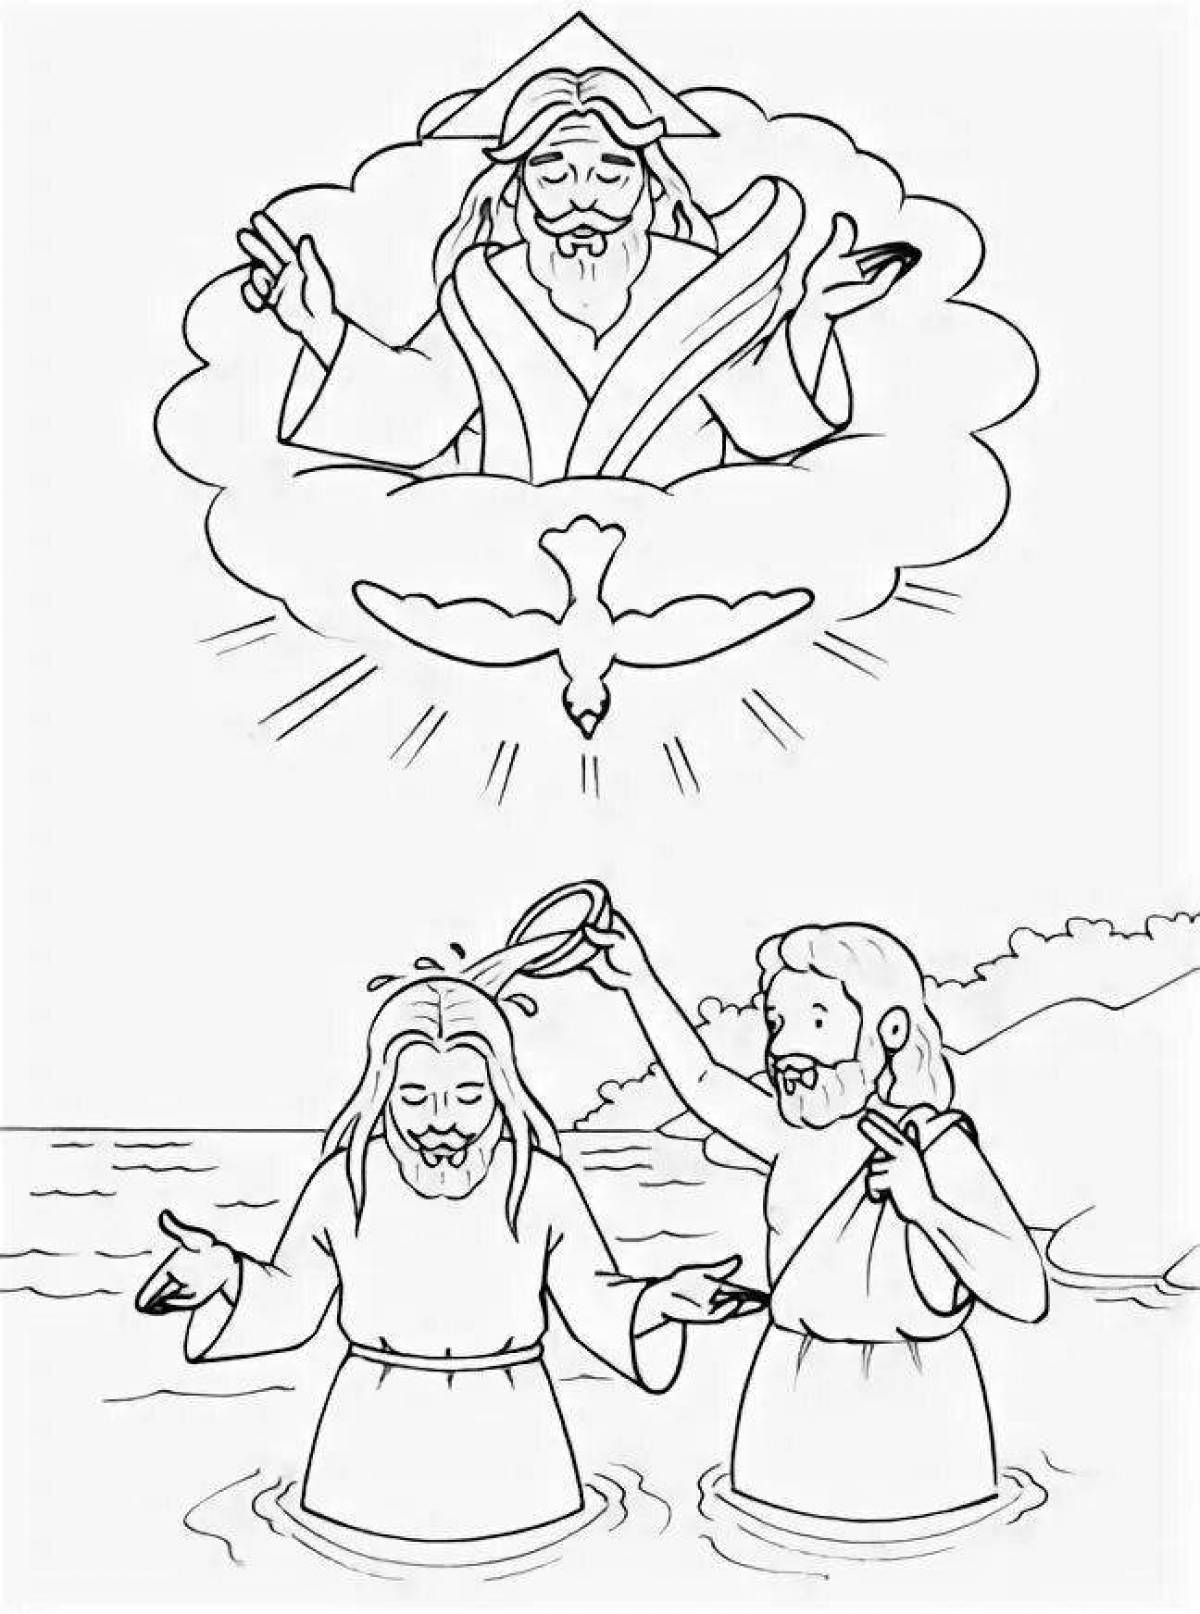 Great baptism coloring for Orthodox children